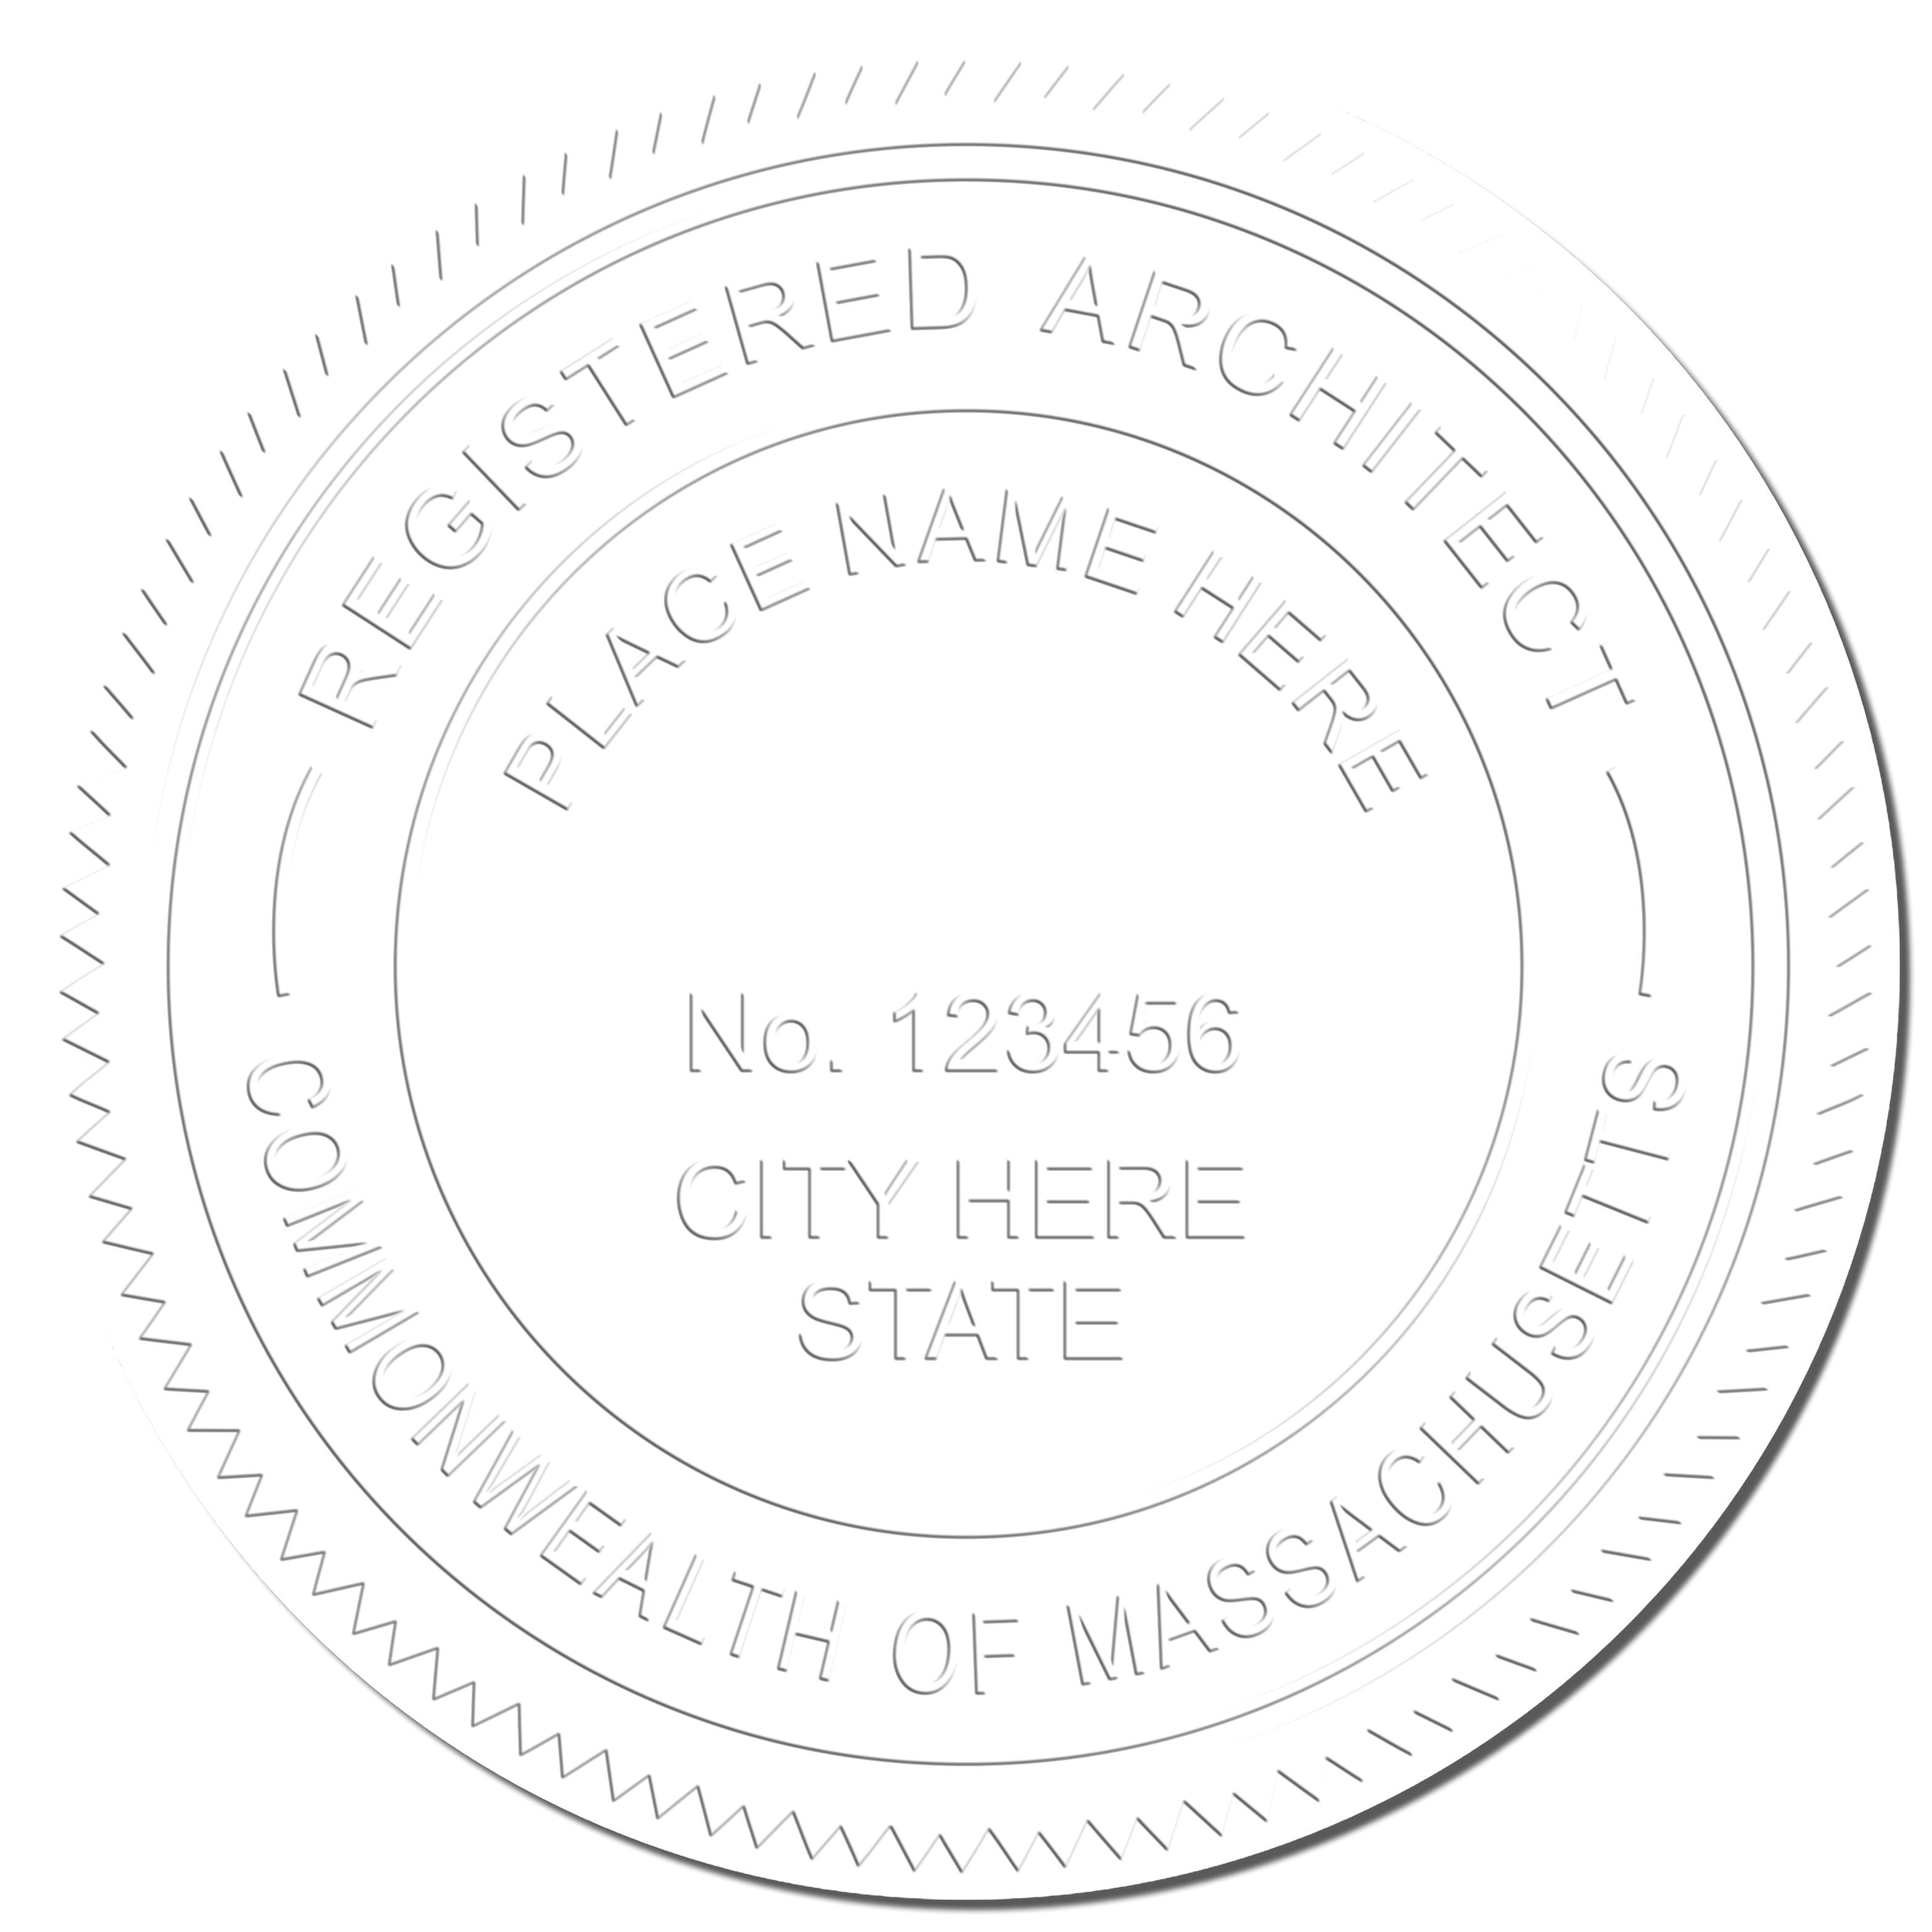 A stamped impression of the State of Massachusetts Long Reach Architectural Embossing Seal in this stylish lifestyle photo, setting the tone for a unique and personalized product.